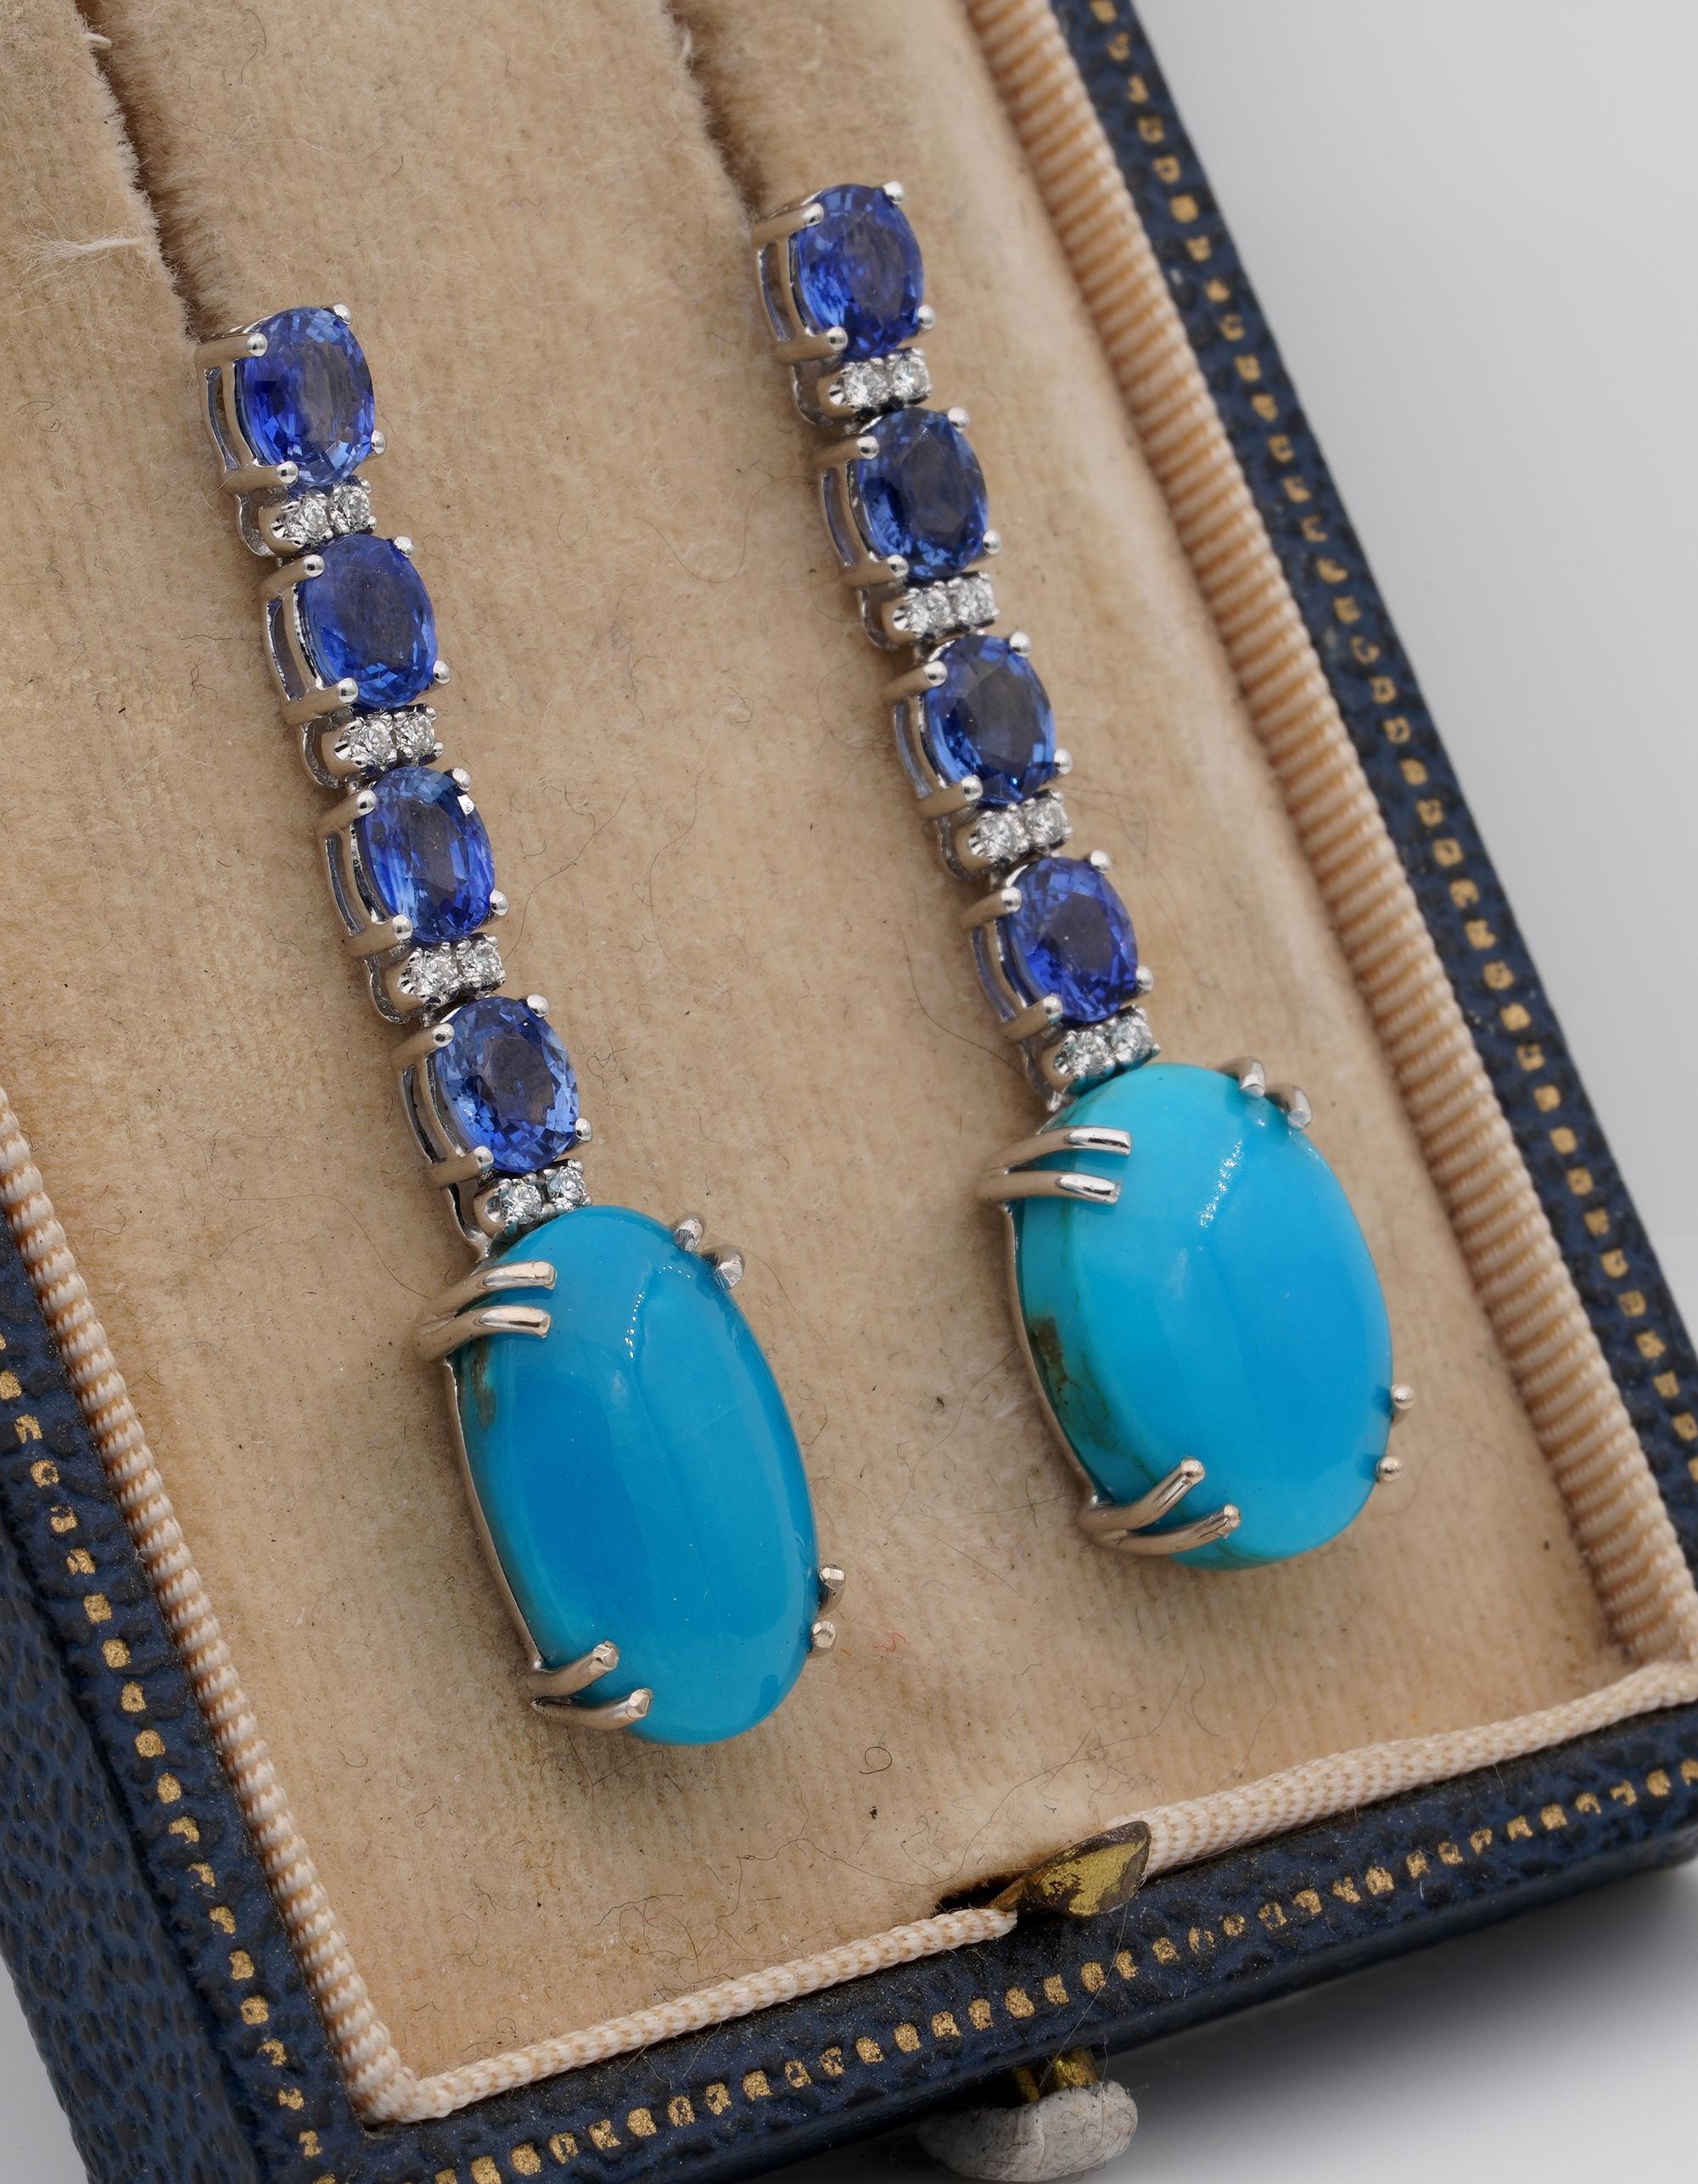 Magic Blue Hues
Sign of distinction are given by these vintage earrings dating 1960 ca
Hand crafted of solid 18 KT gold in a tasteful design to match any time
A line of selected natural NO HEAT Ceylon Sapphires – bright lovely Blue boast at the top,